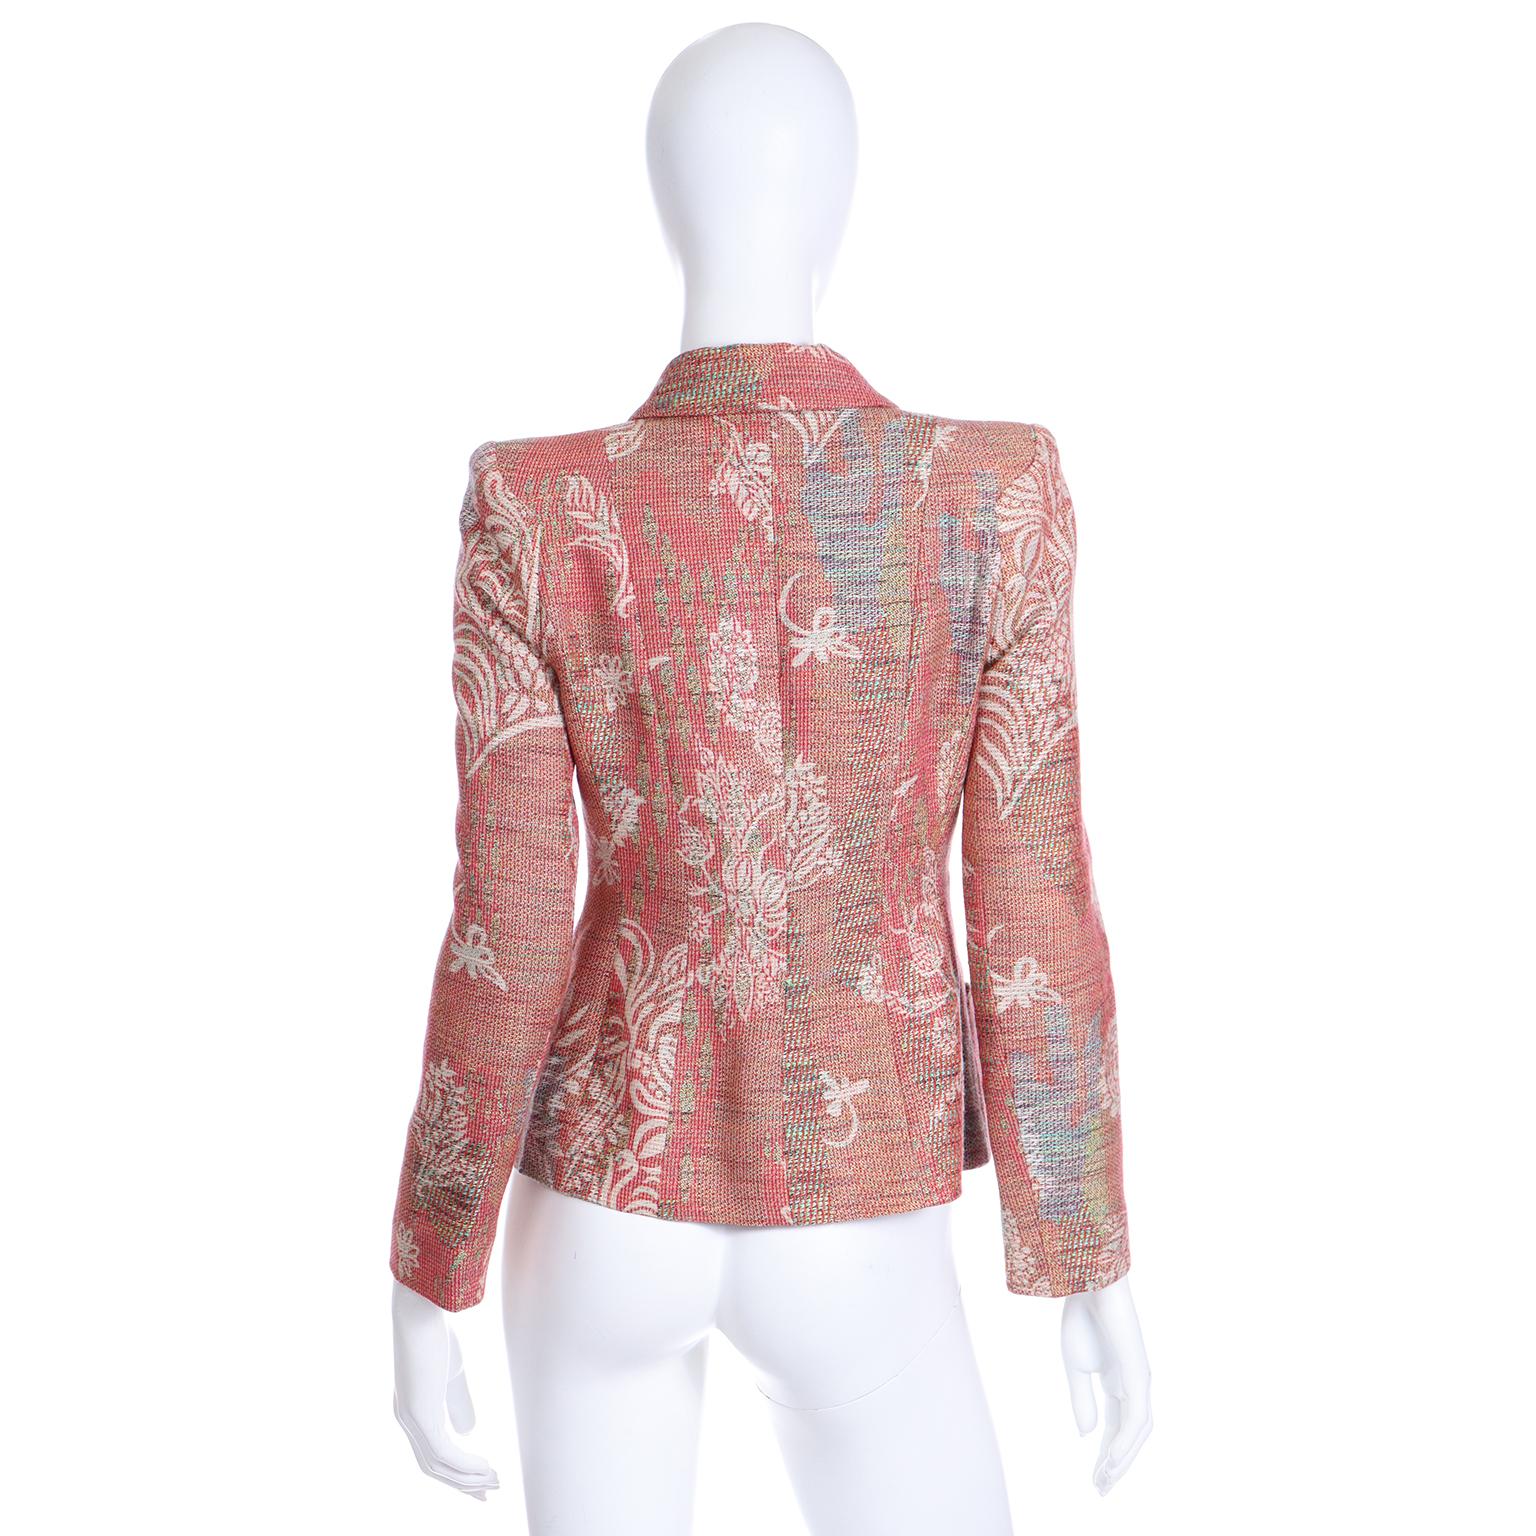 Vintage Christian Lacroix Spring 1999 Blazer Jacket in Linen Wool Blend In Excellent Condition For Sale In Portland, OR